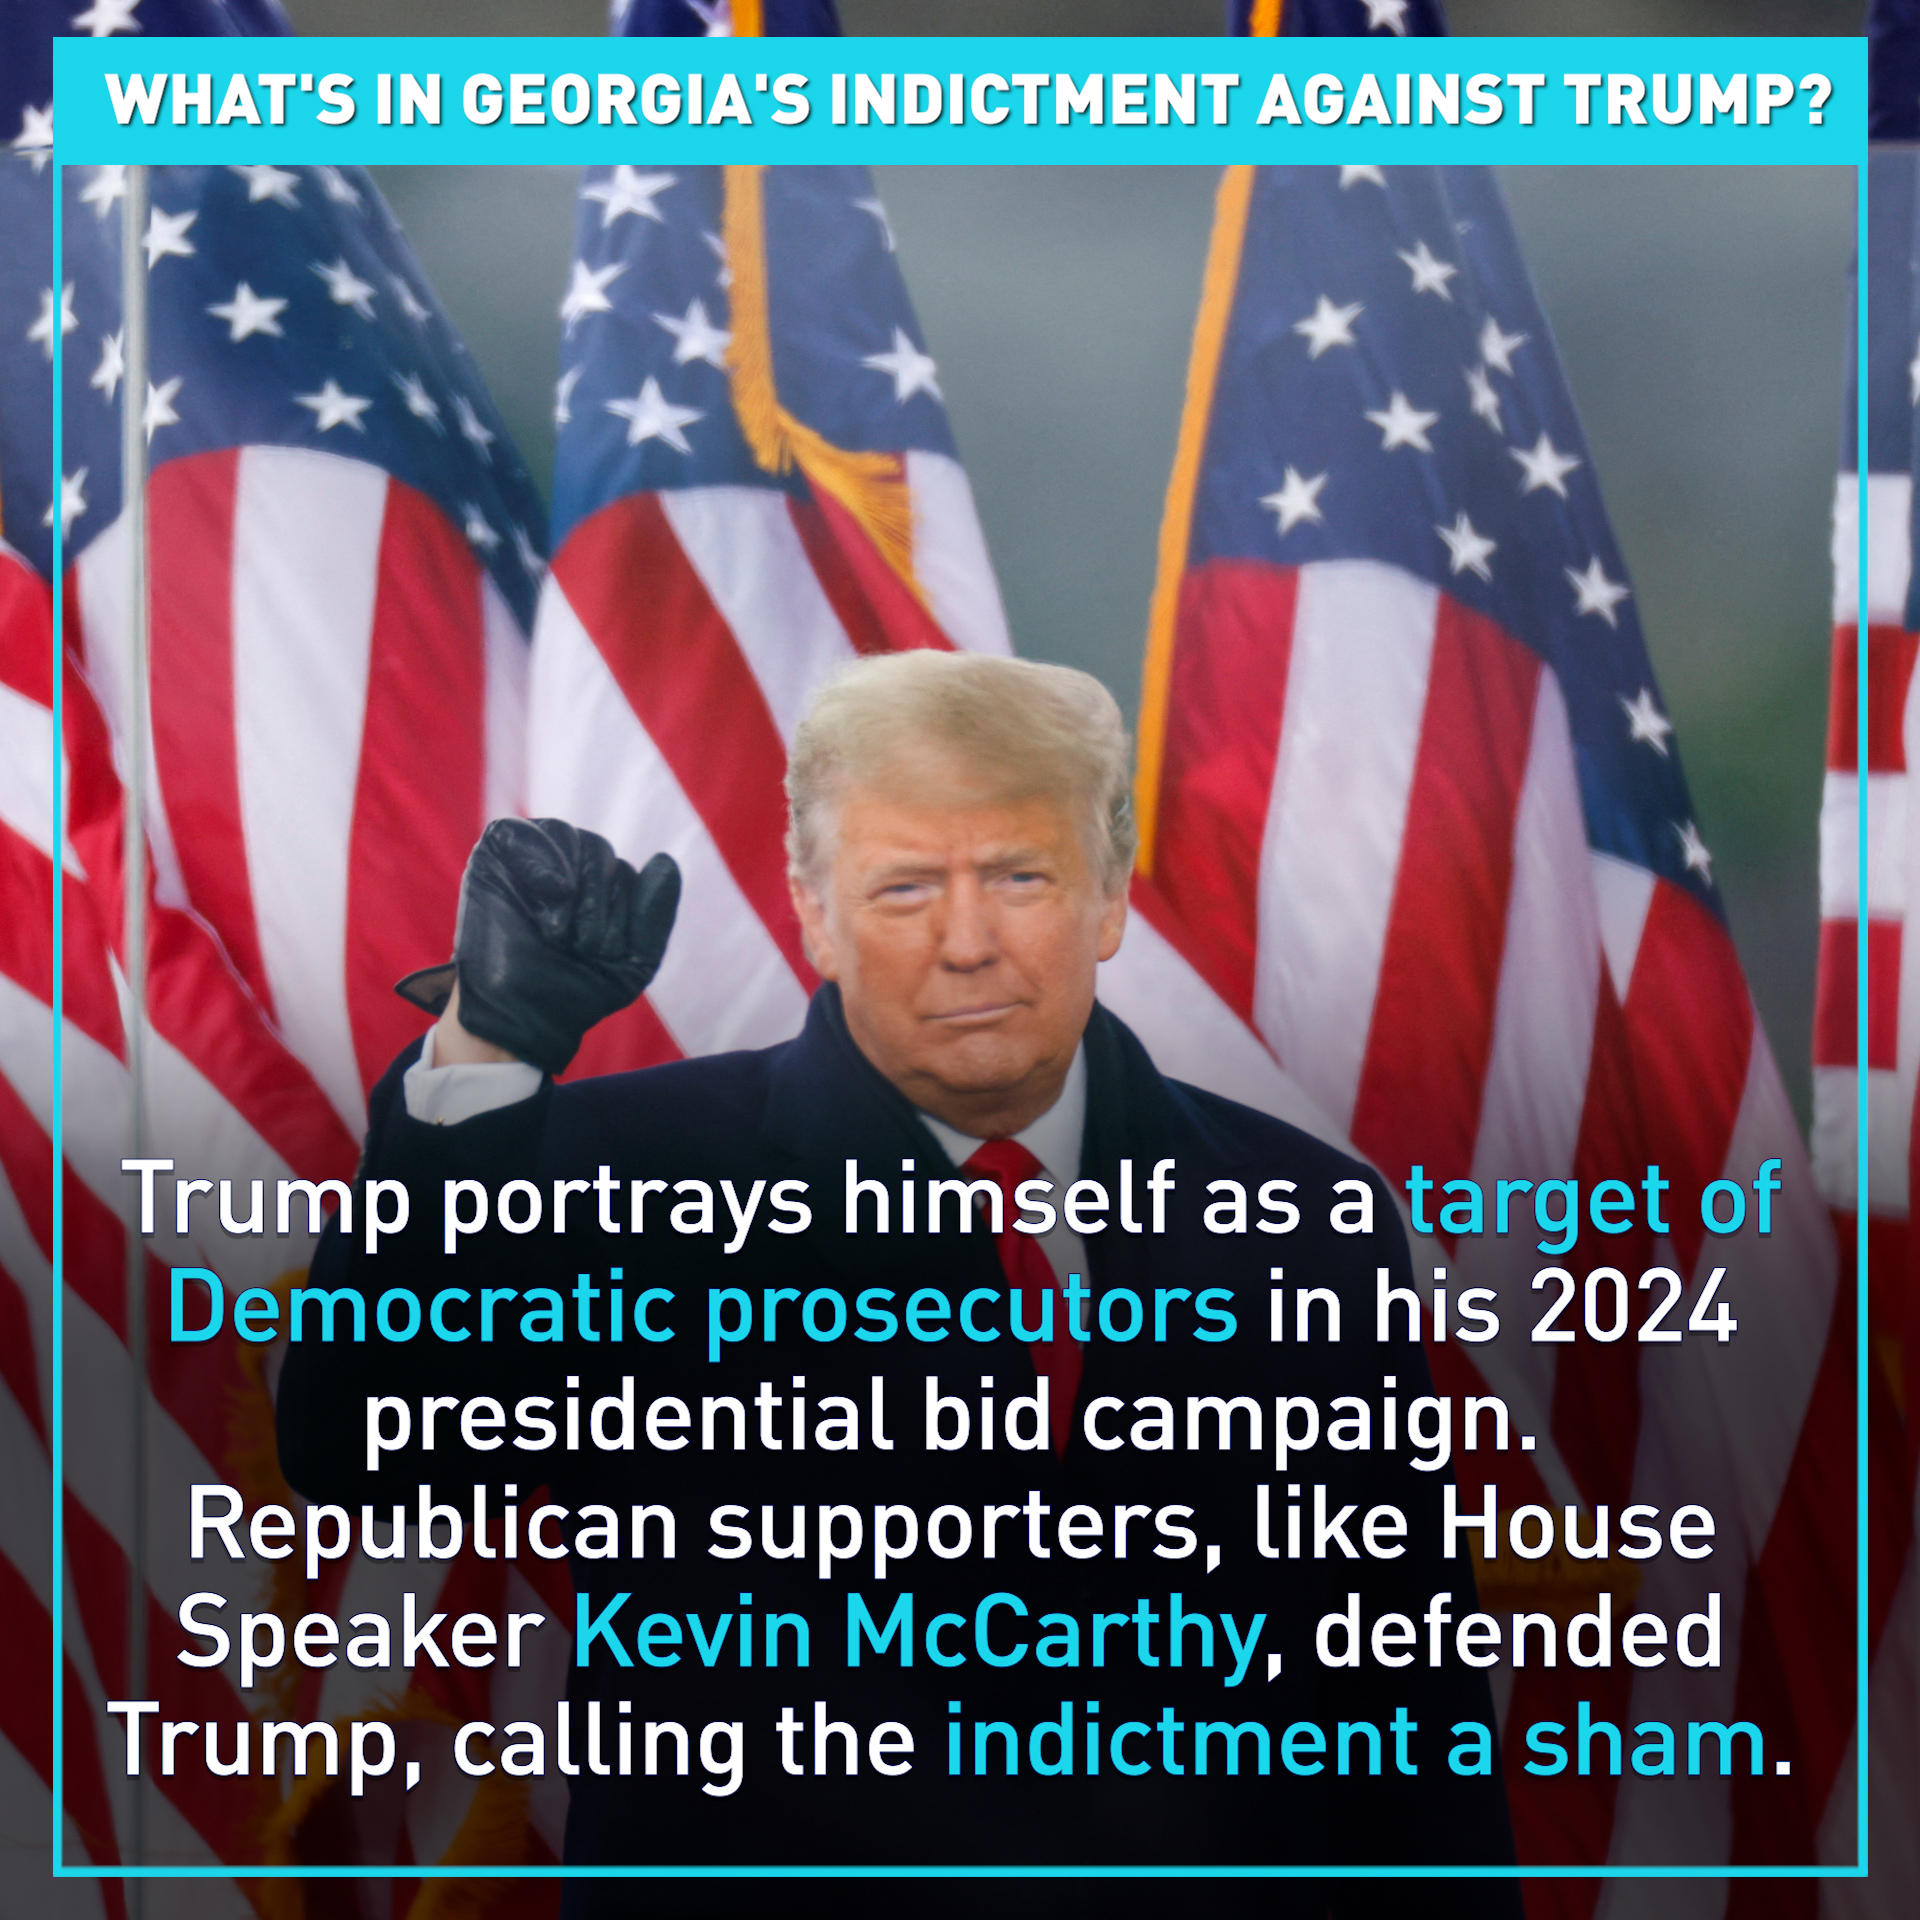 What is in Georgia's indictment against Trump?